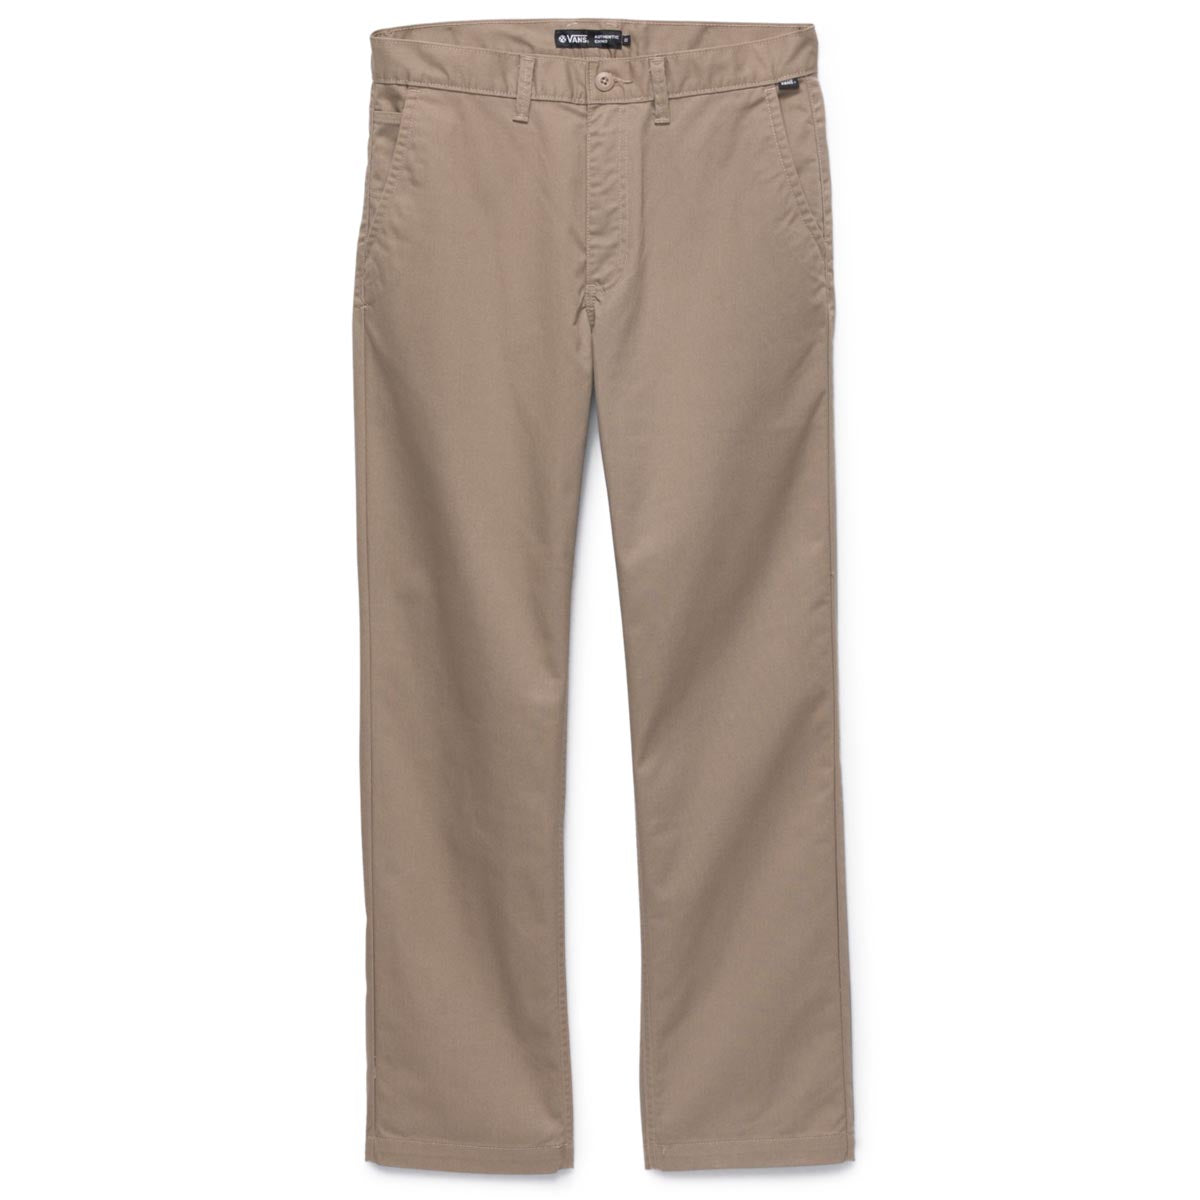 Vans Authentic Chino Relaxed Pants - Desert Taupe image 4